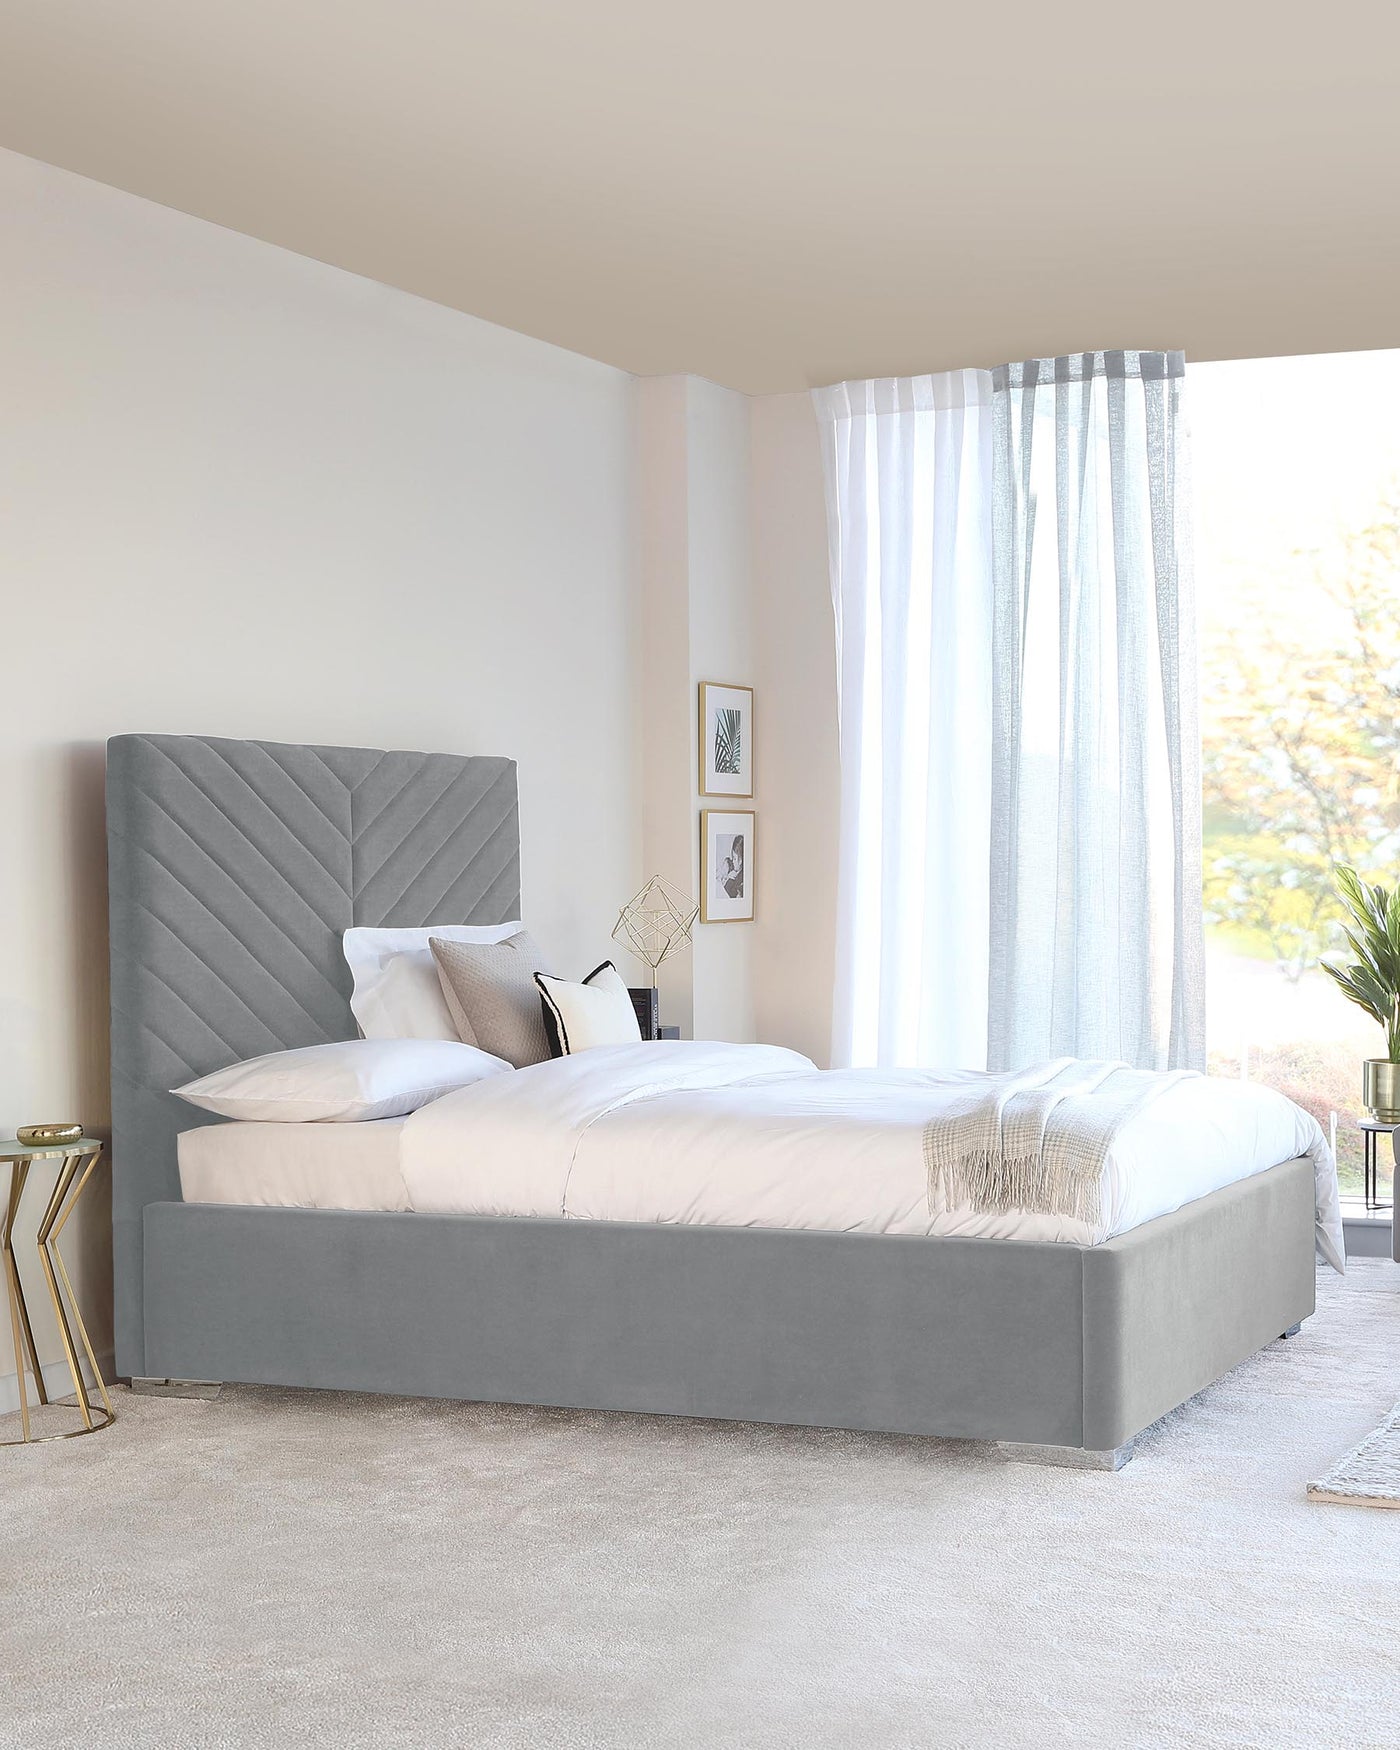 Elegant grey upholstered king-size platform bed with a high headboard featuring vertical channel tufting. Beside the bed is a gold metal side table with a cylindrical base and a round top.